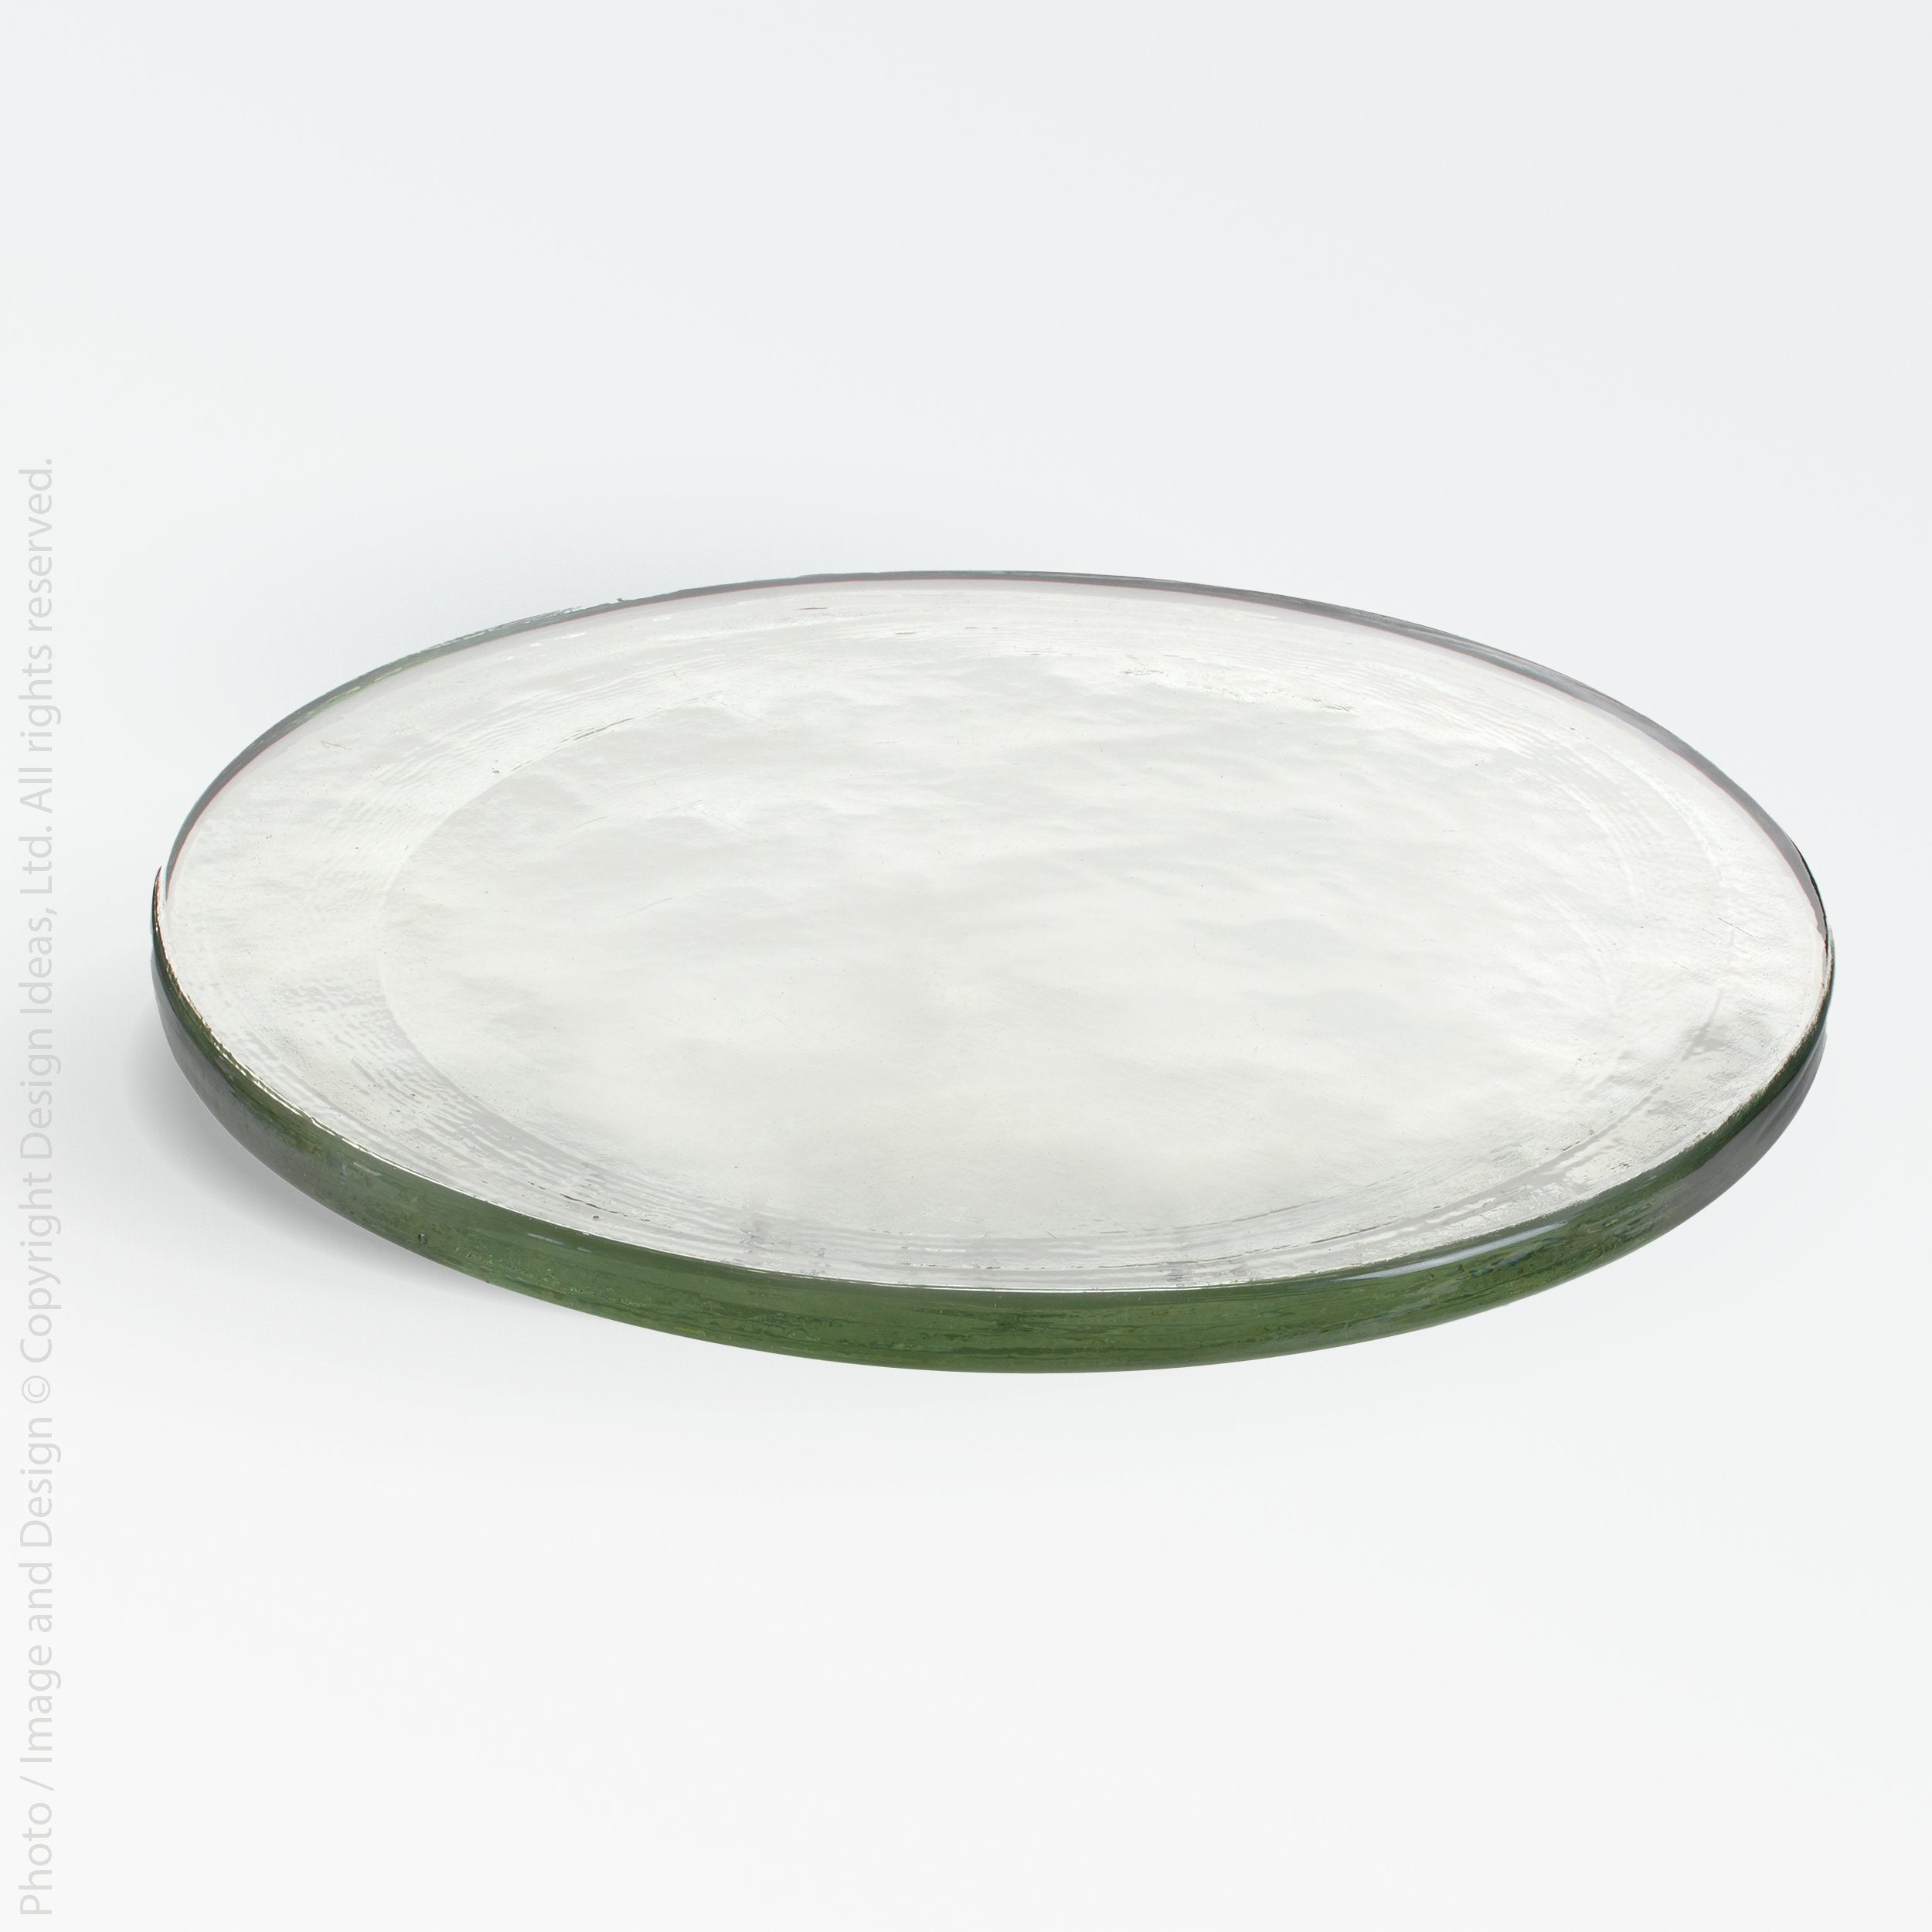 Avalon Glass Tray - Black Color | Image 1 | From the Avalon Collection | Elegantly created with natural glass for long lasting use | Available in natural color | texxture home